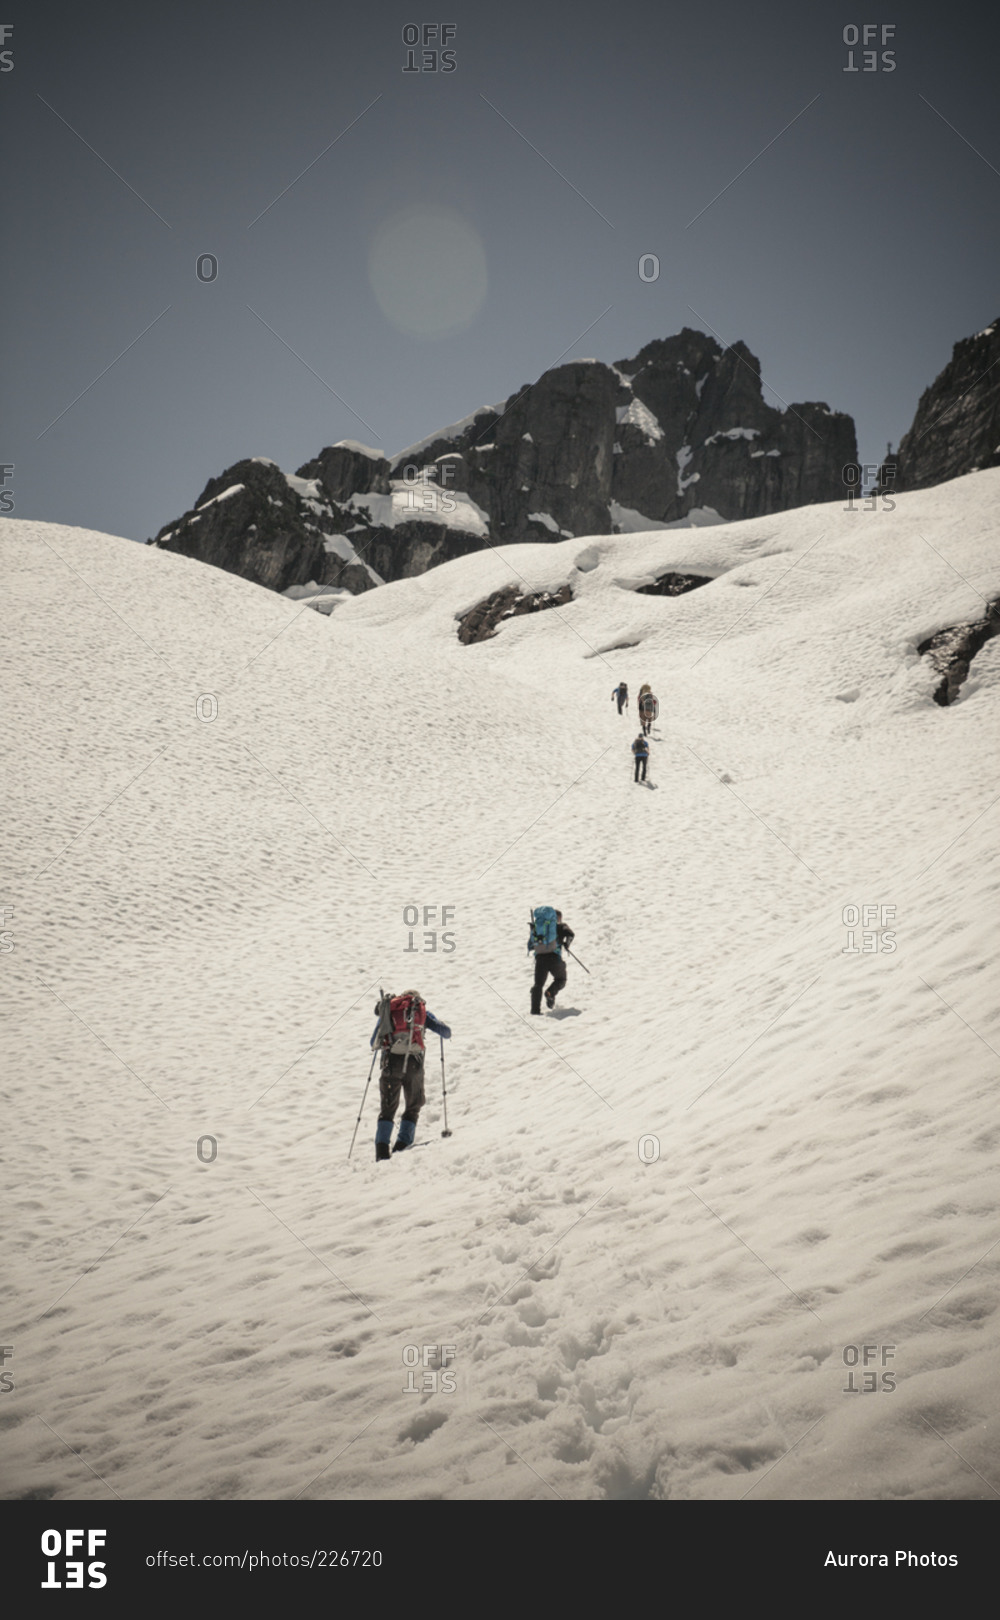 Six climbers cross a snow patch en route to climb Trio Peak in British Columbia, Canada